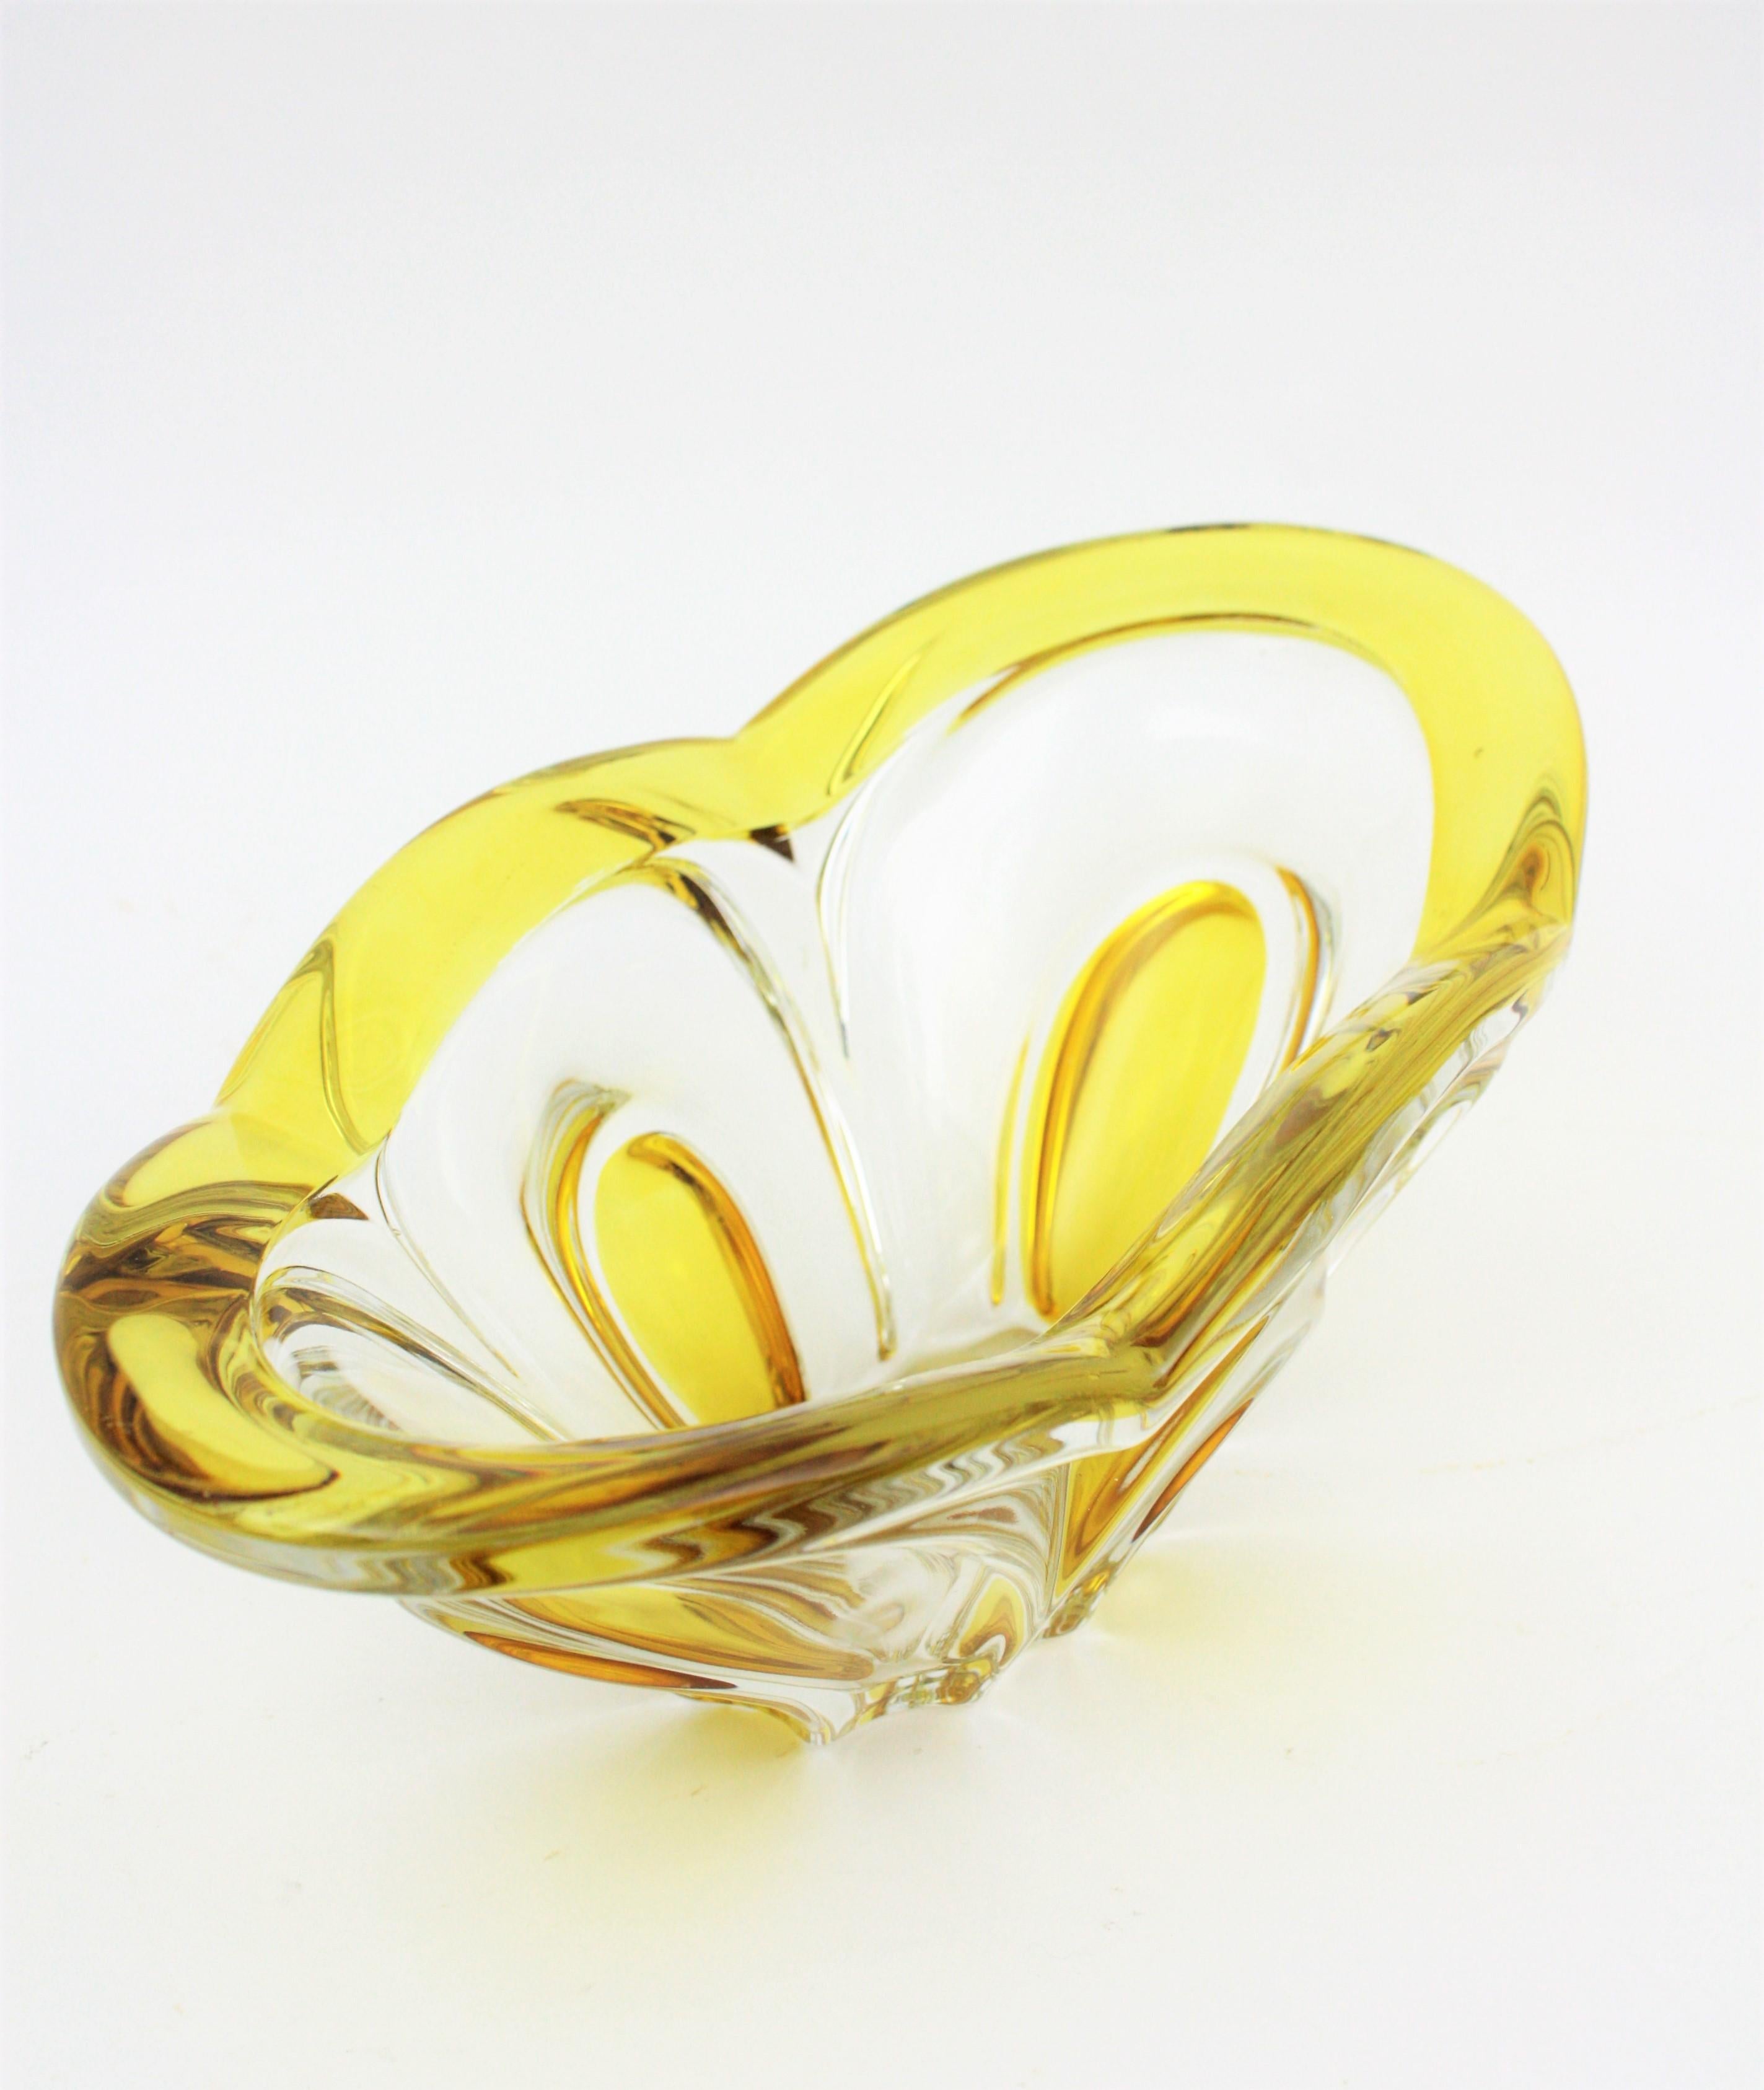 Mid-20th Century Italian 1950s Scalloped Sommerso Yellow and Clear Murano Glass Centrepiece